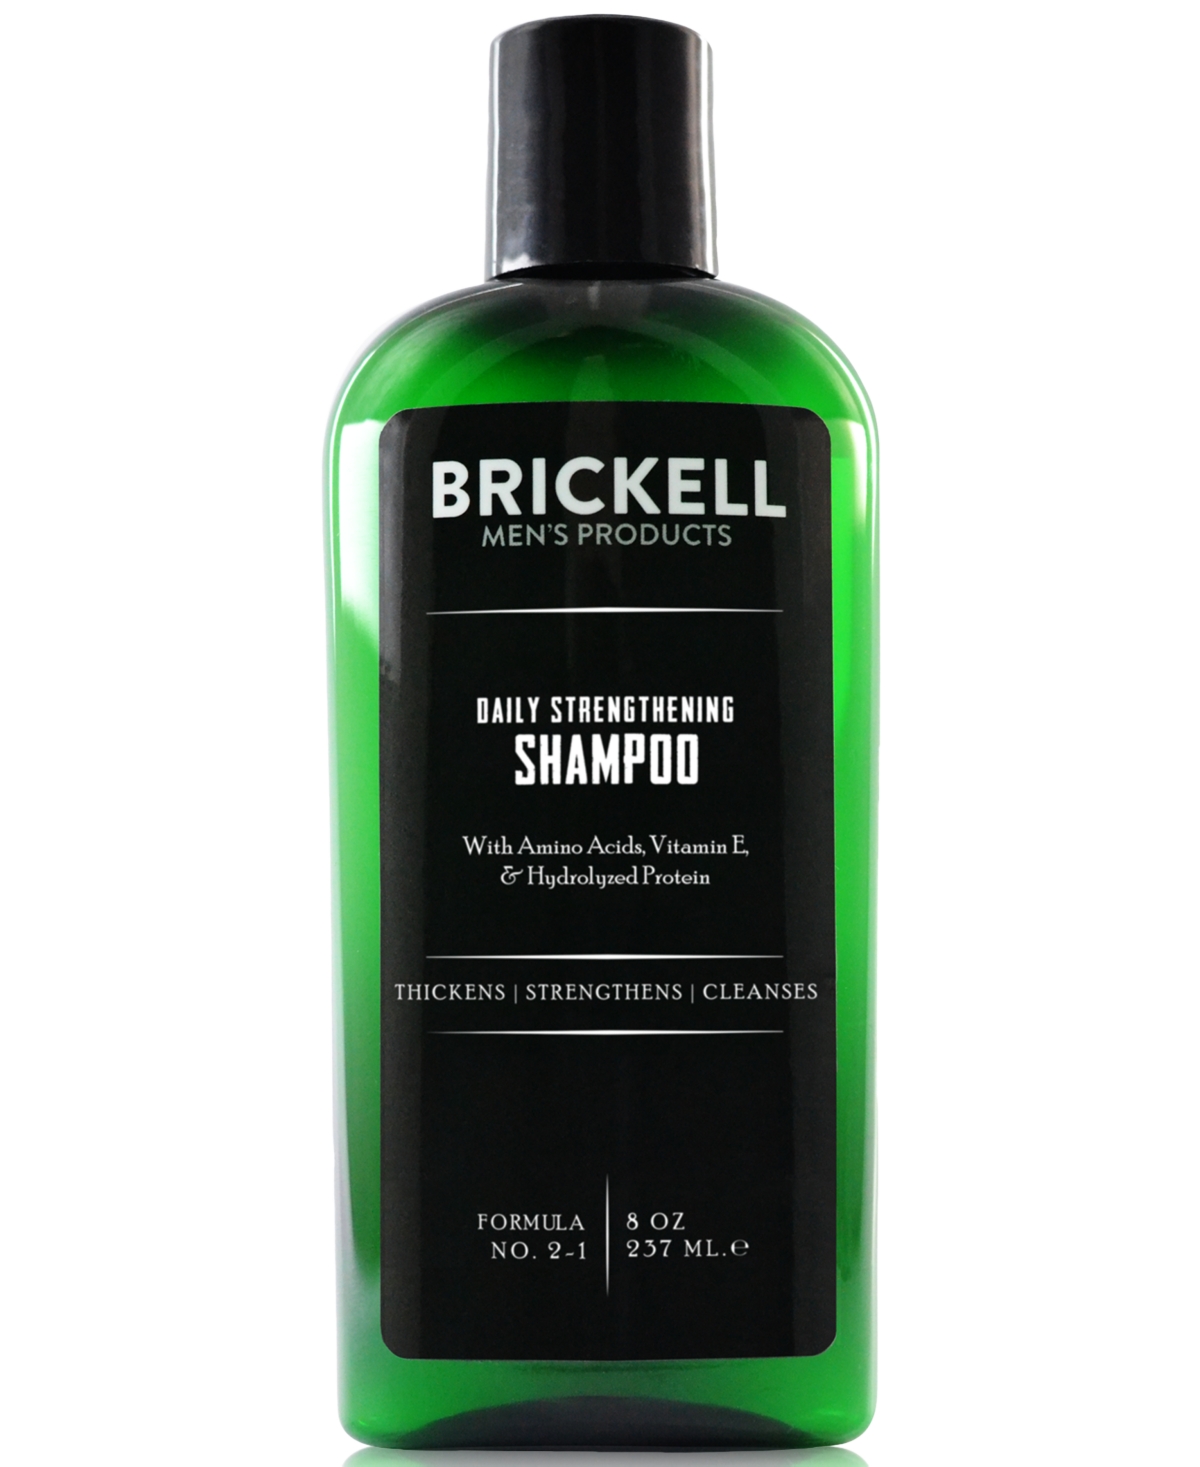 Brickell Mens Products Brickell Men's Products Daily Strengthening Shampoo, 8 Oz.